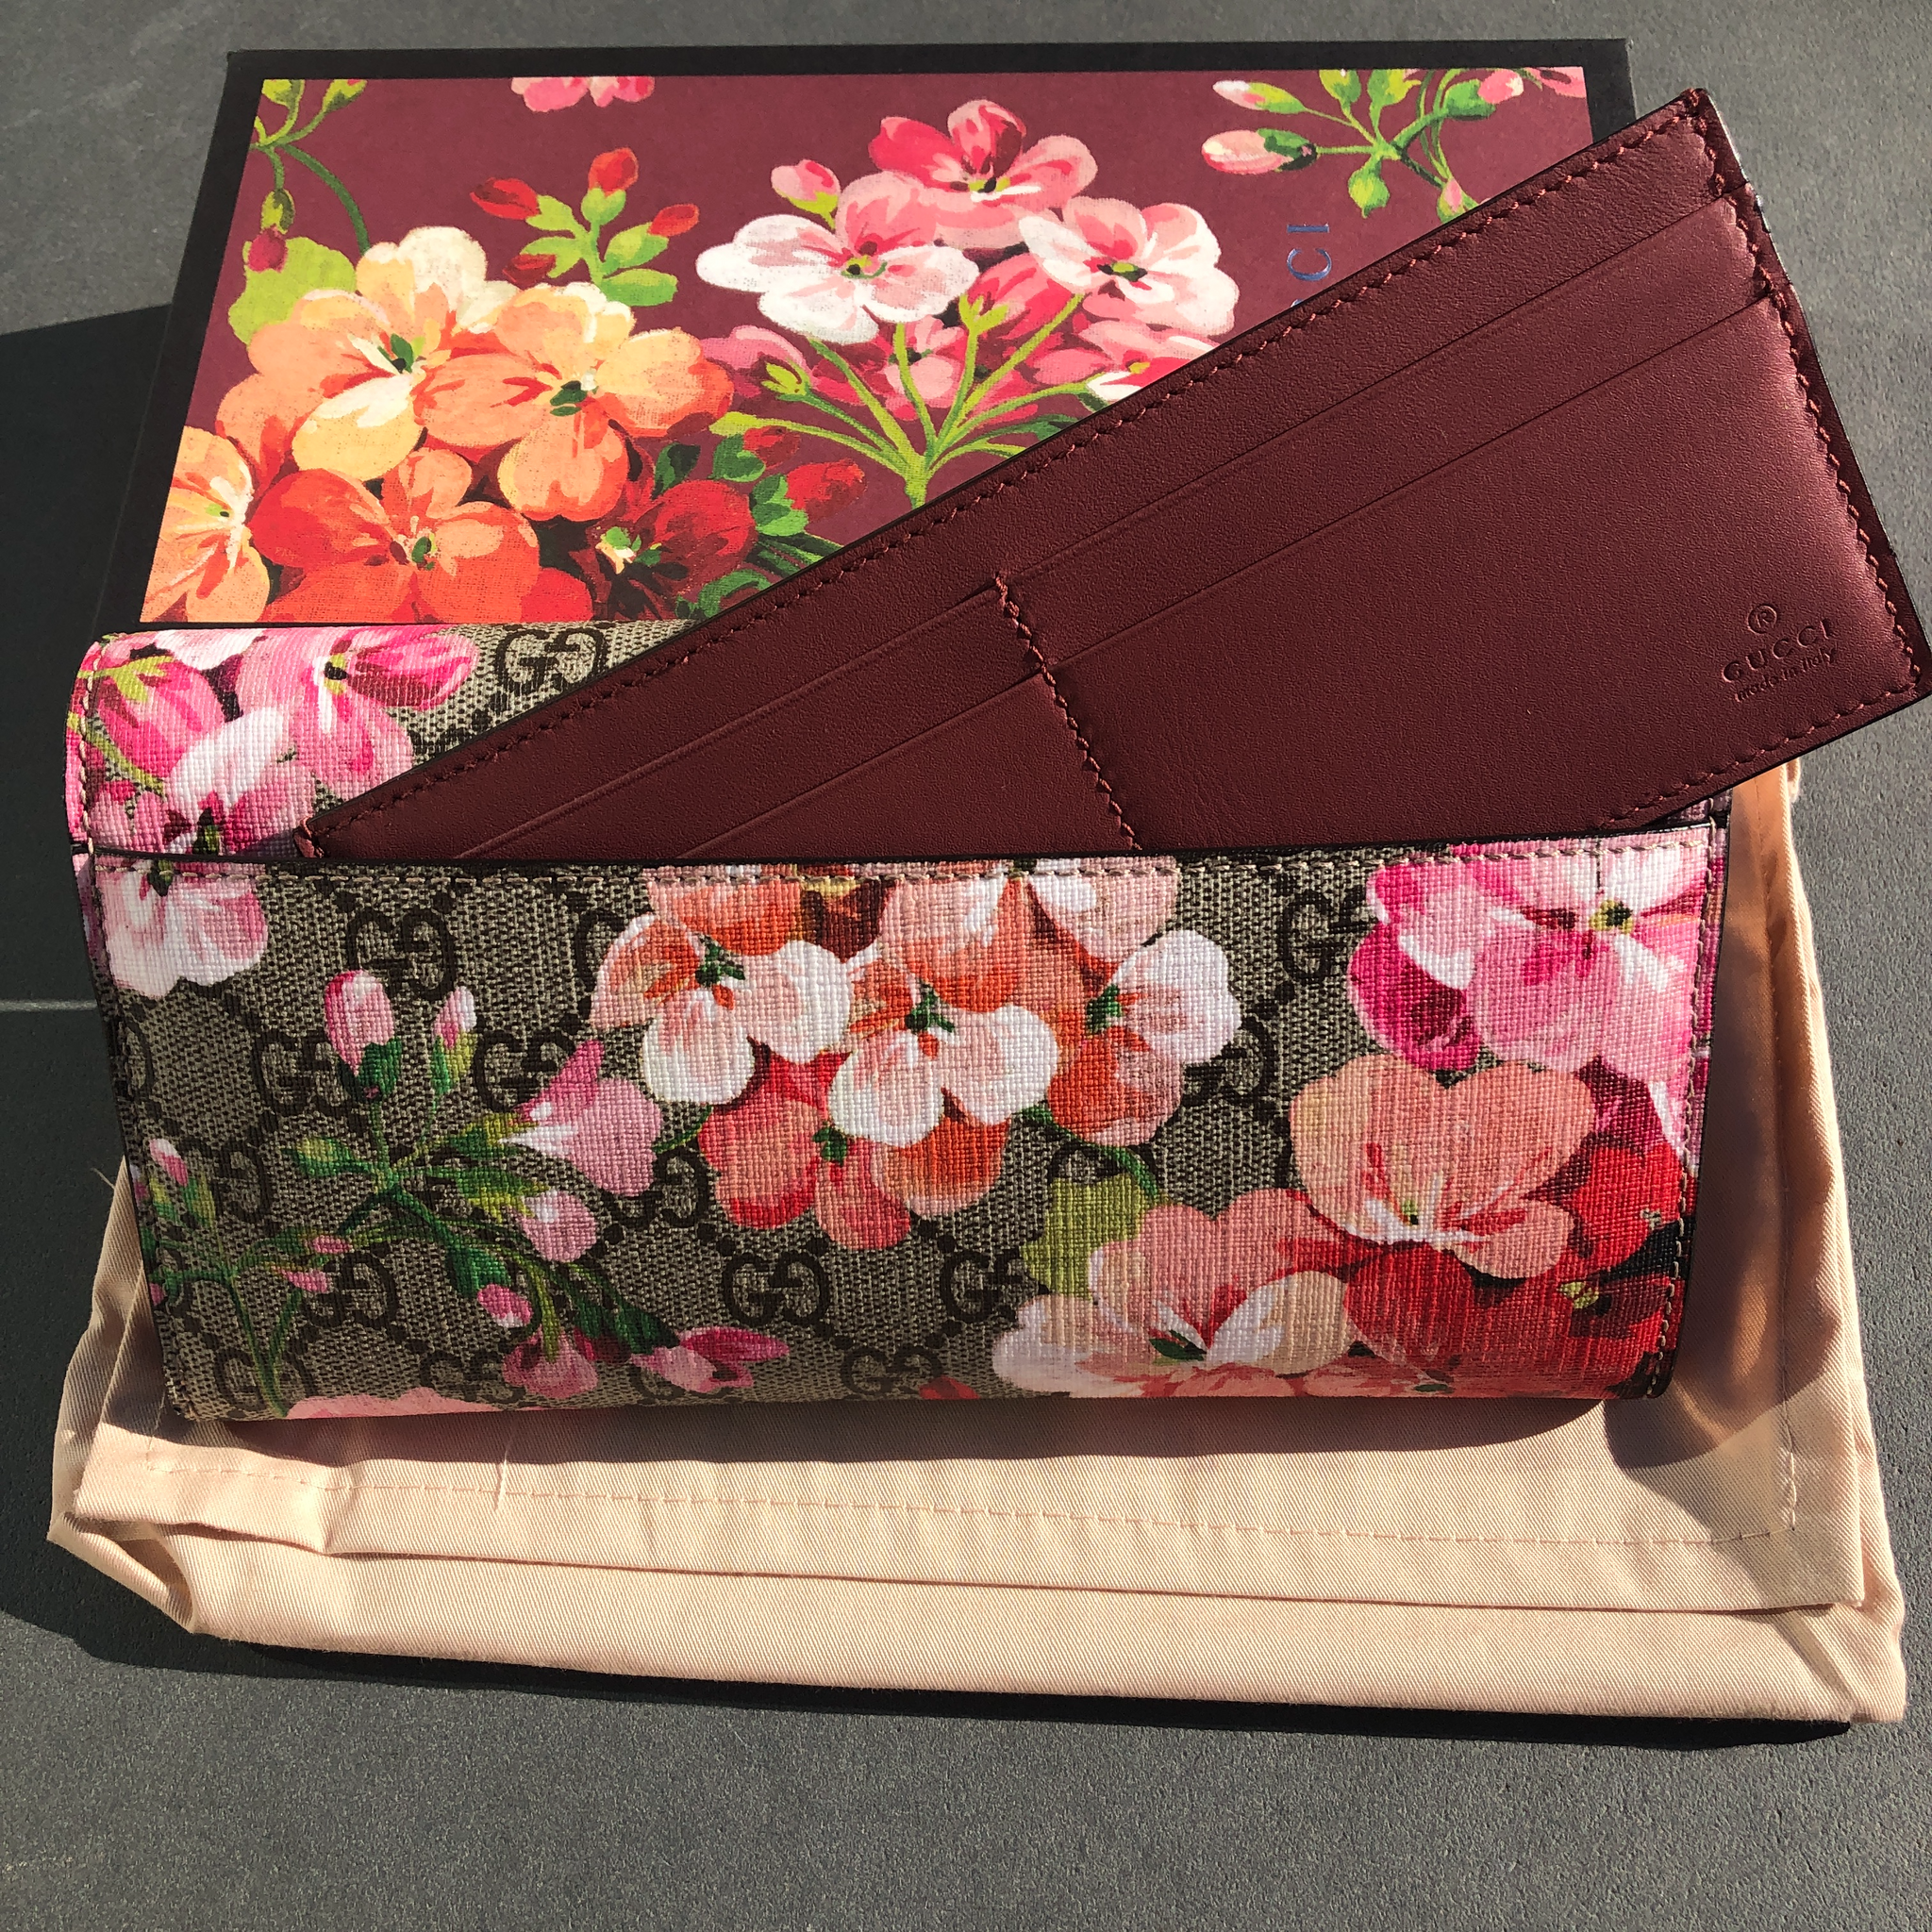 Gucci GG Supreme Guccissima Pink Blooms Print Floral Leather Clutch Pouch  Bag 